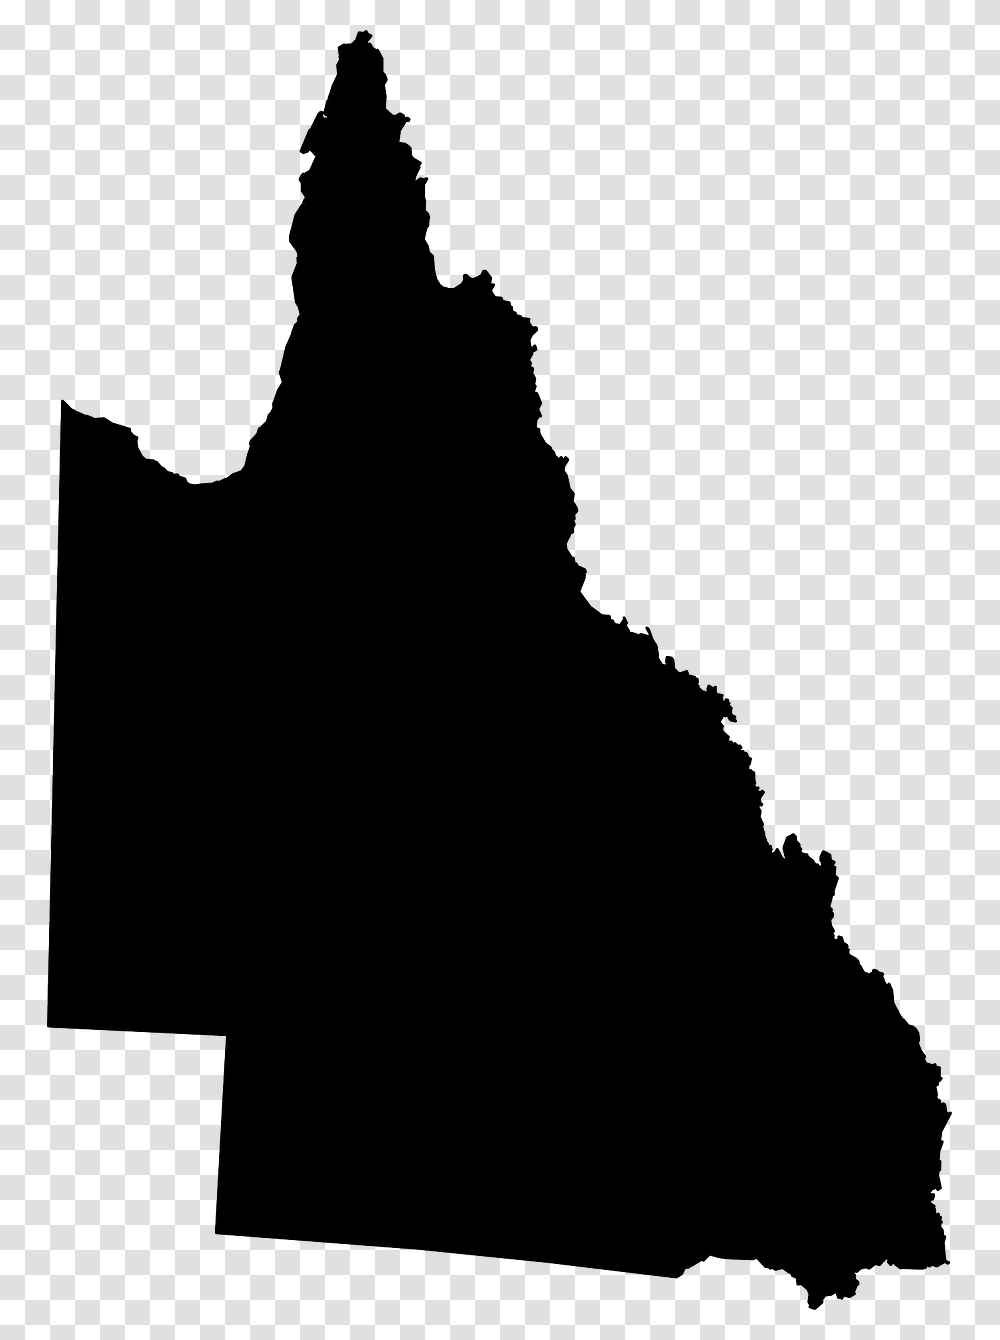 Queensland State Vector, Plot, Silhouette, Outdoors Transparent Png